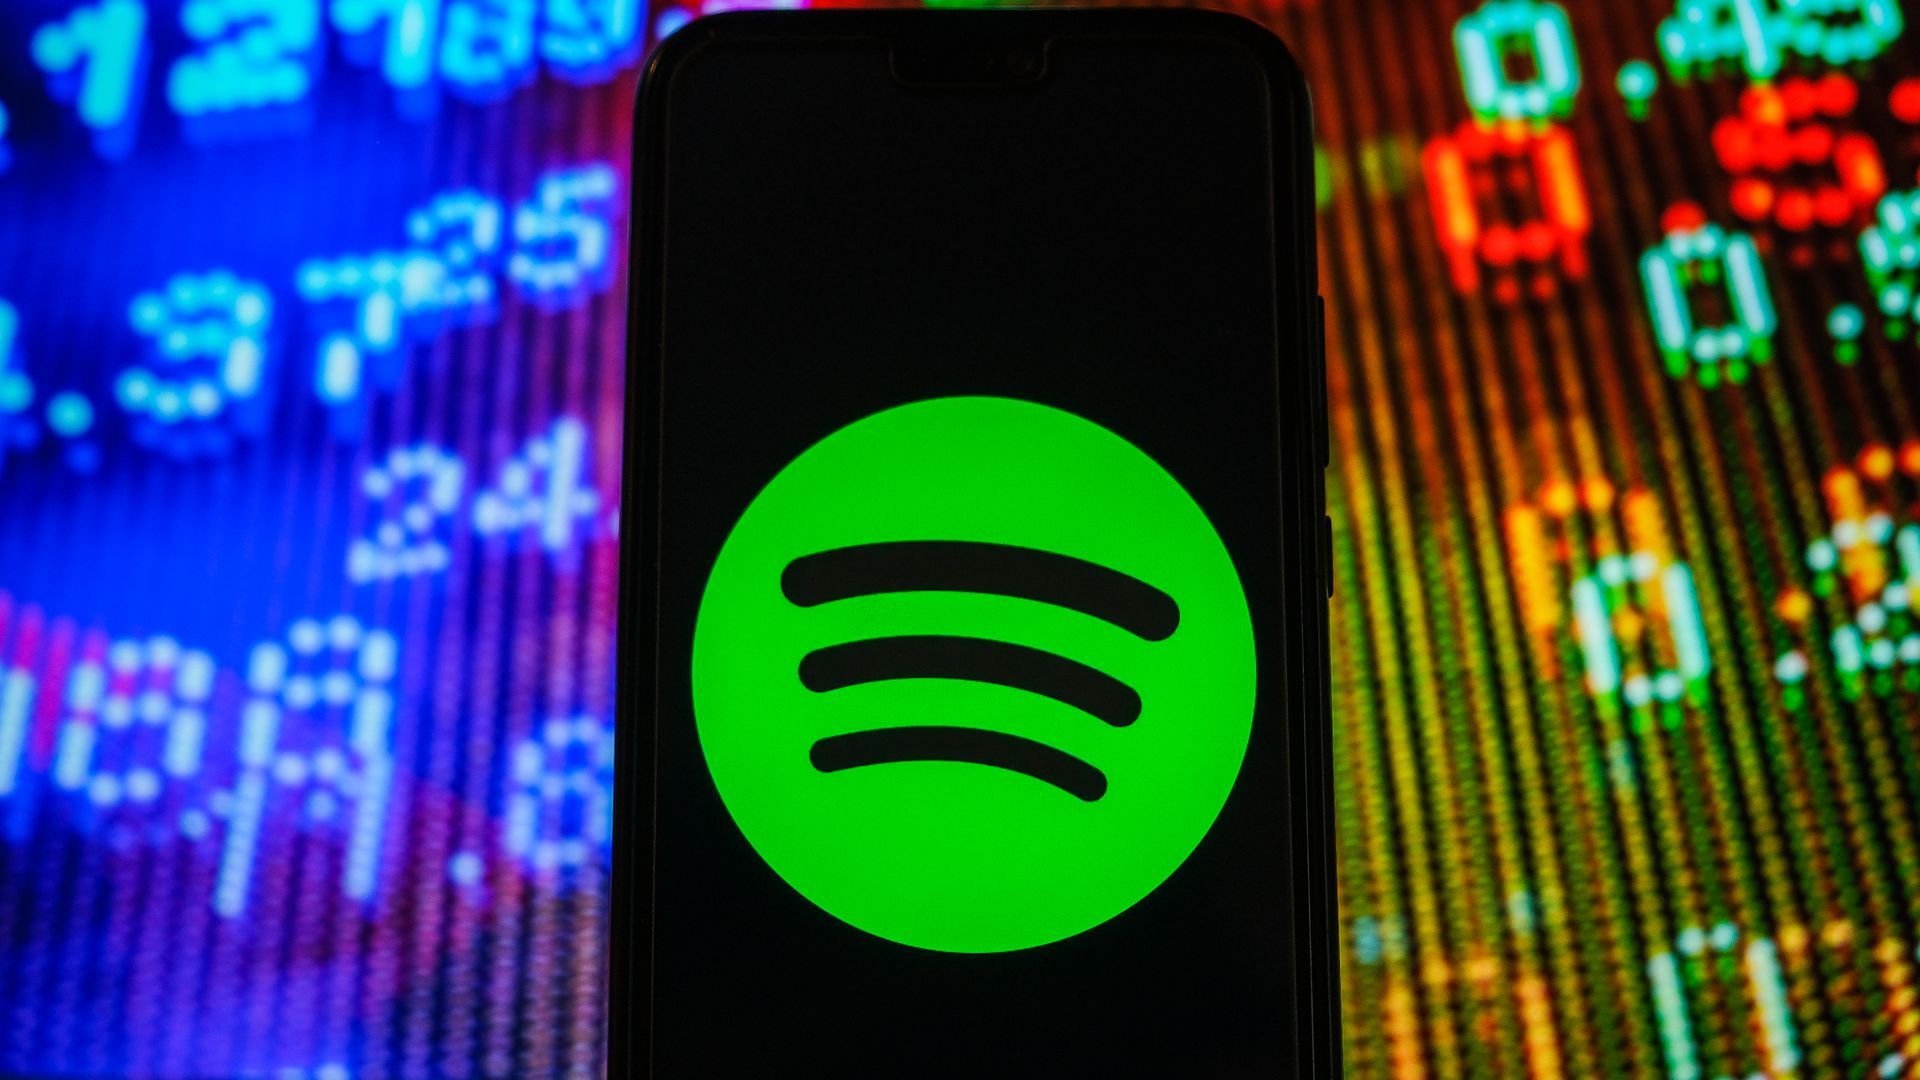 Spotify patents tech to recommend songs based on users' speech, emotion